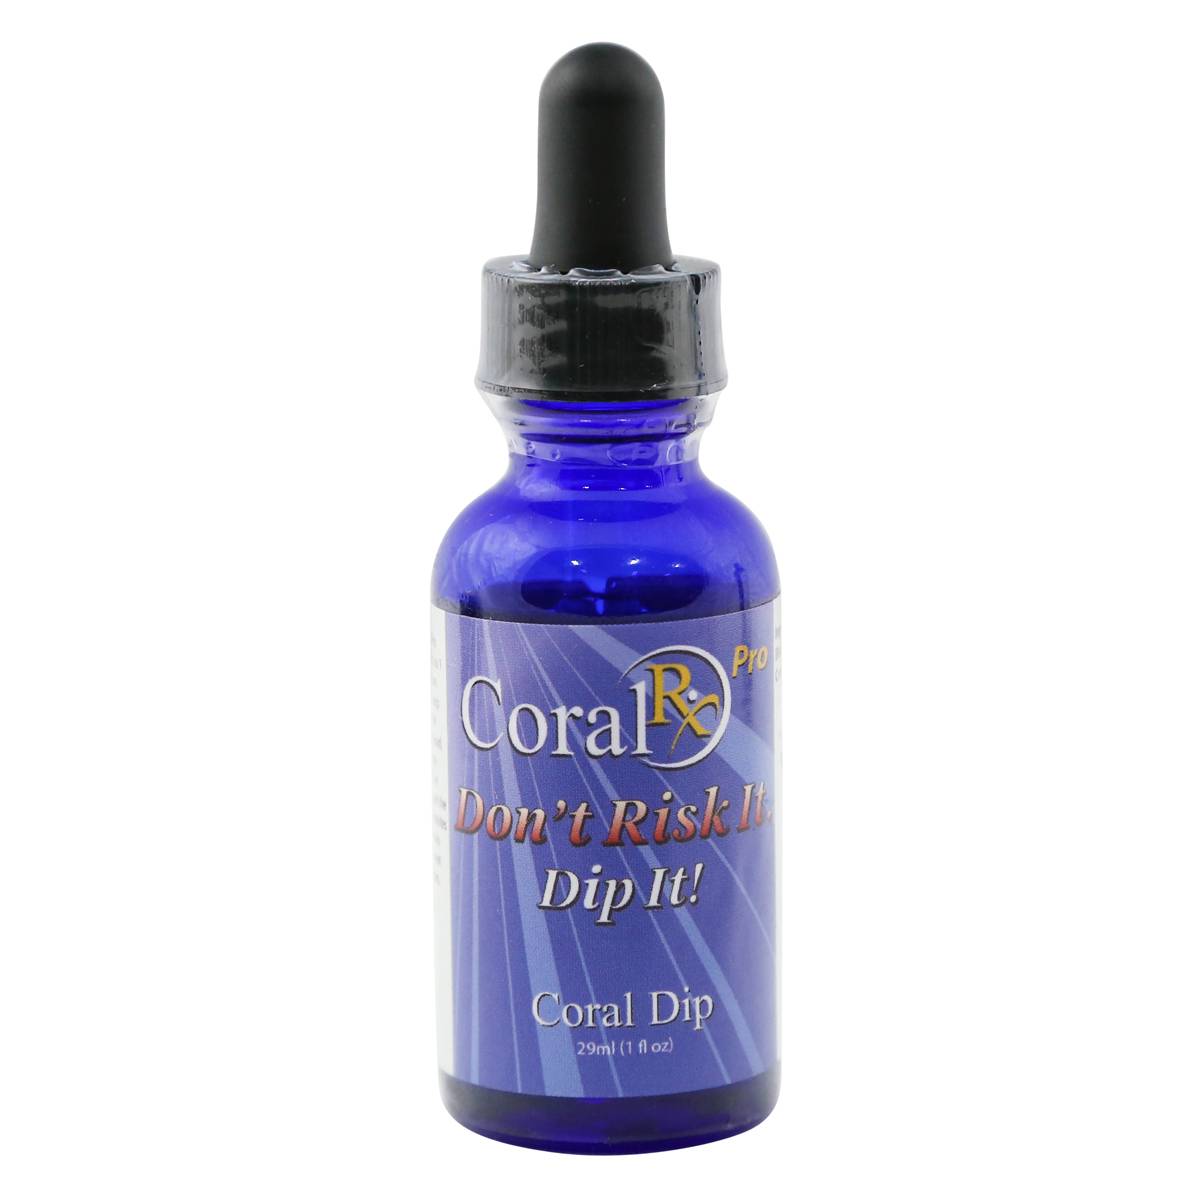 Pro Concentrated Coral Dip 1 oz - Coral RX - Coral RX